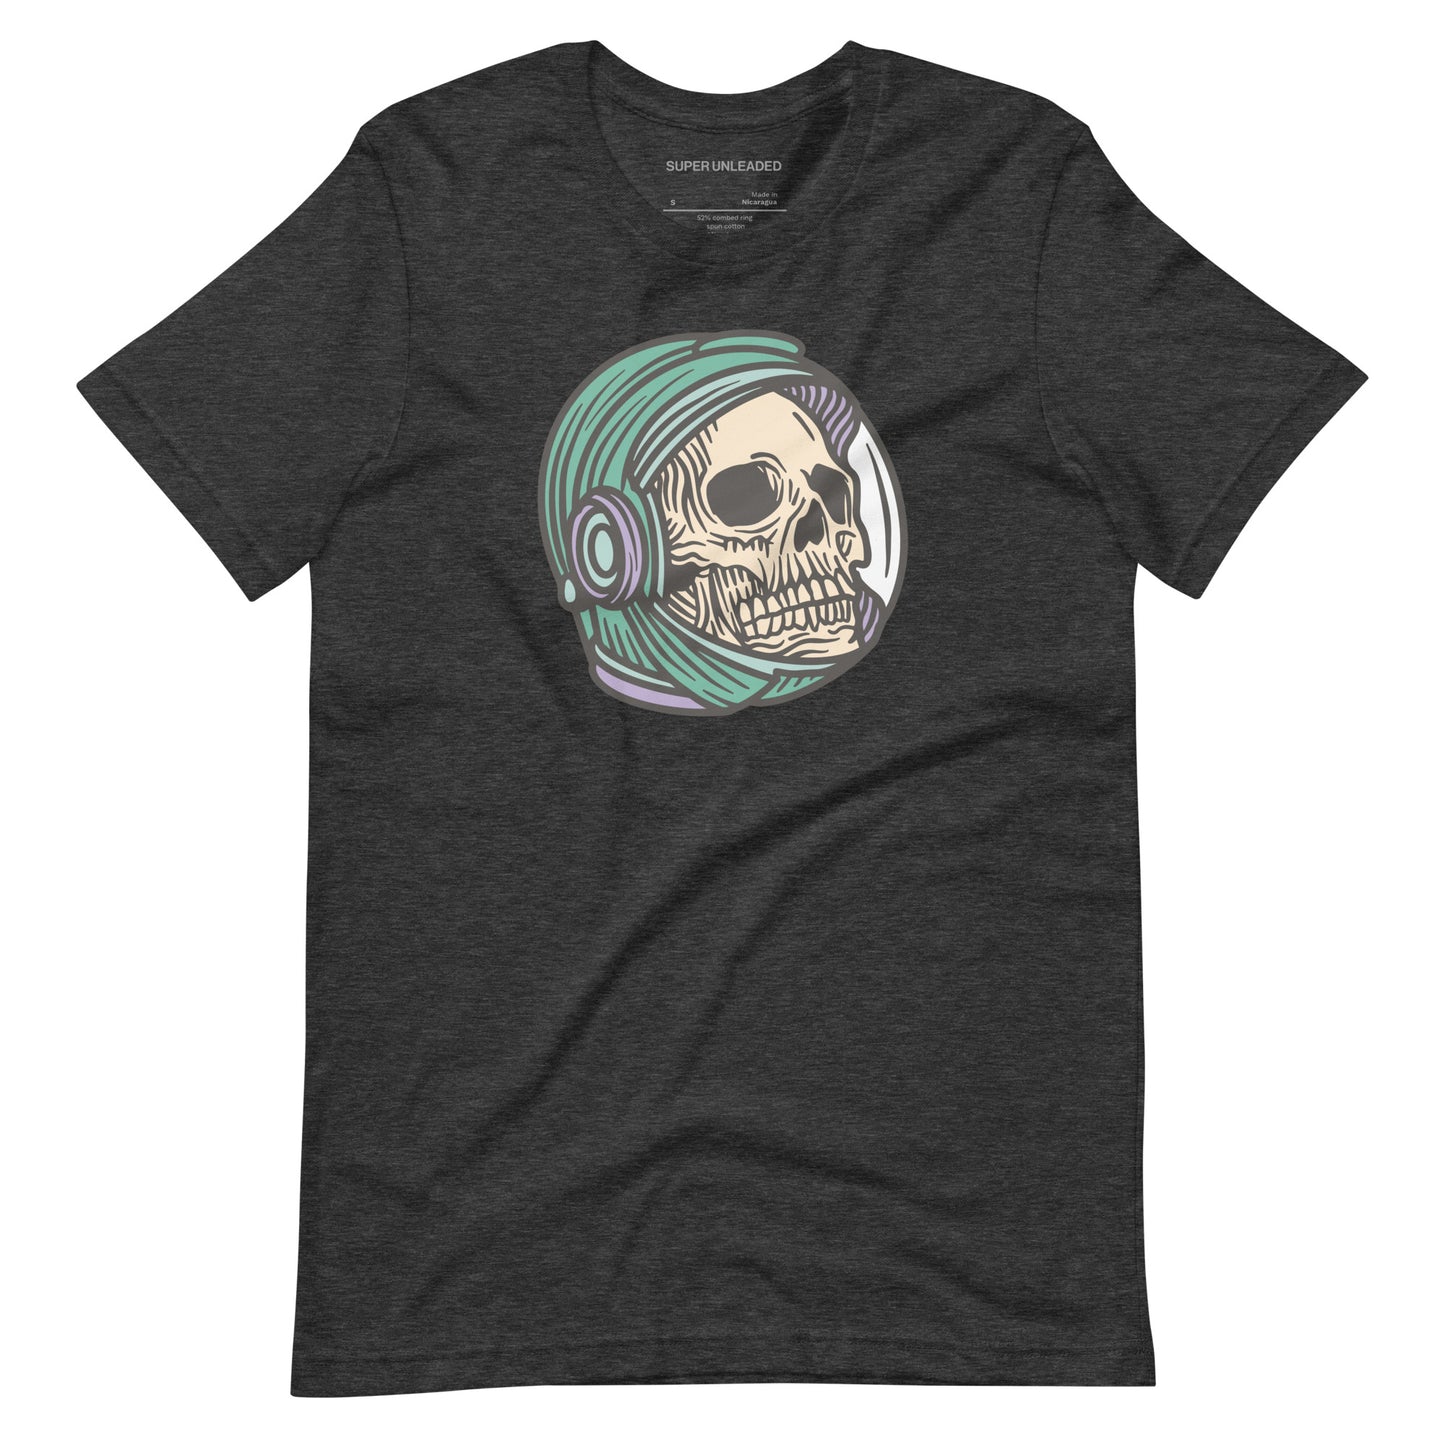 Lost in Space T-shirt